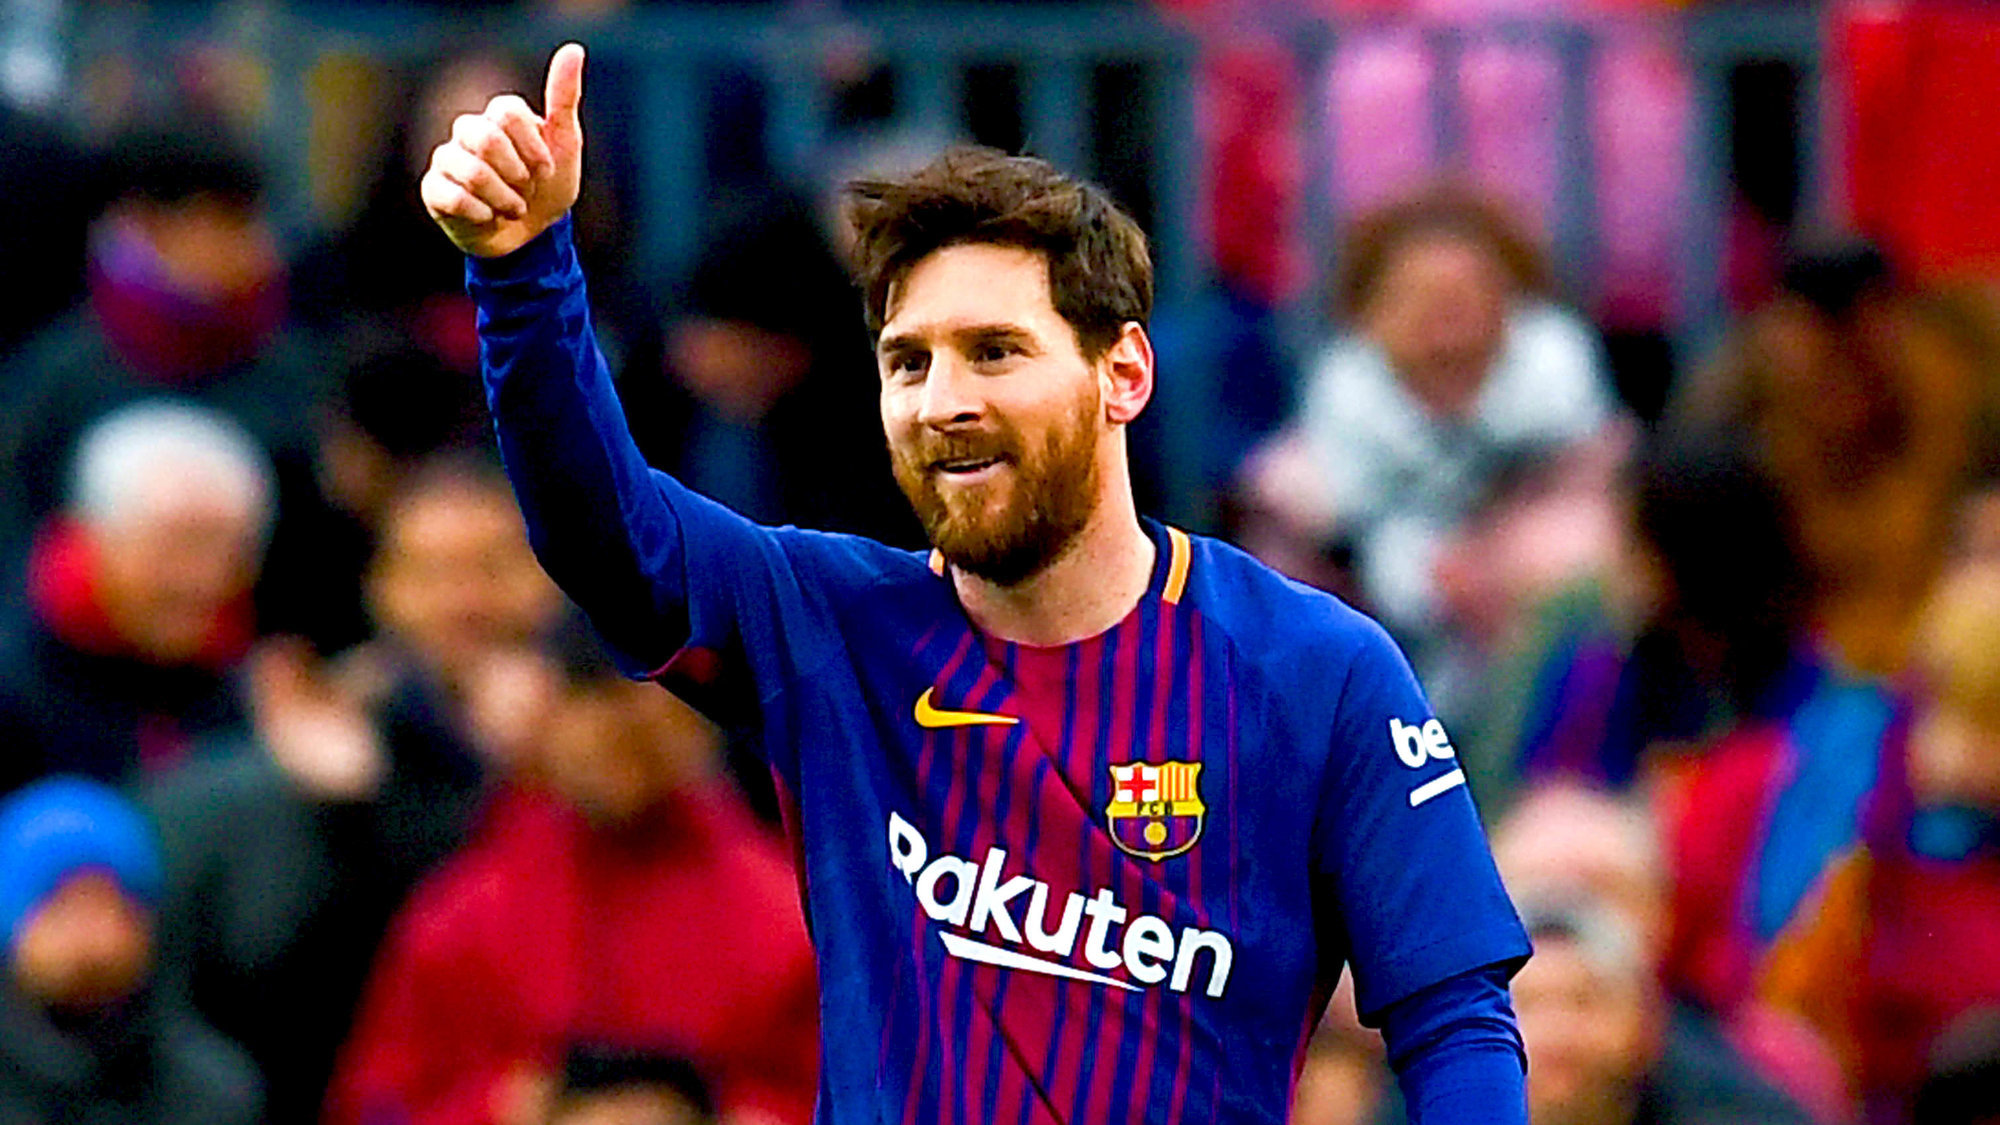 https://sportsandworld.com/barcelona-prepares-10-year-contract-for-messi.html